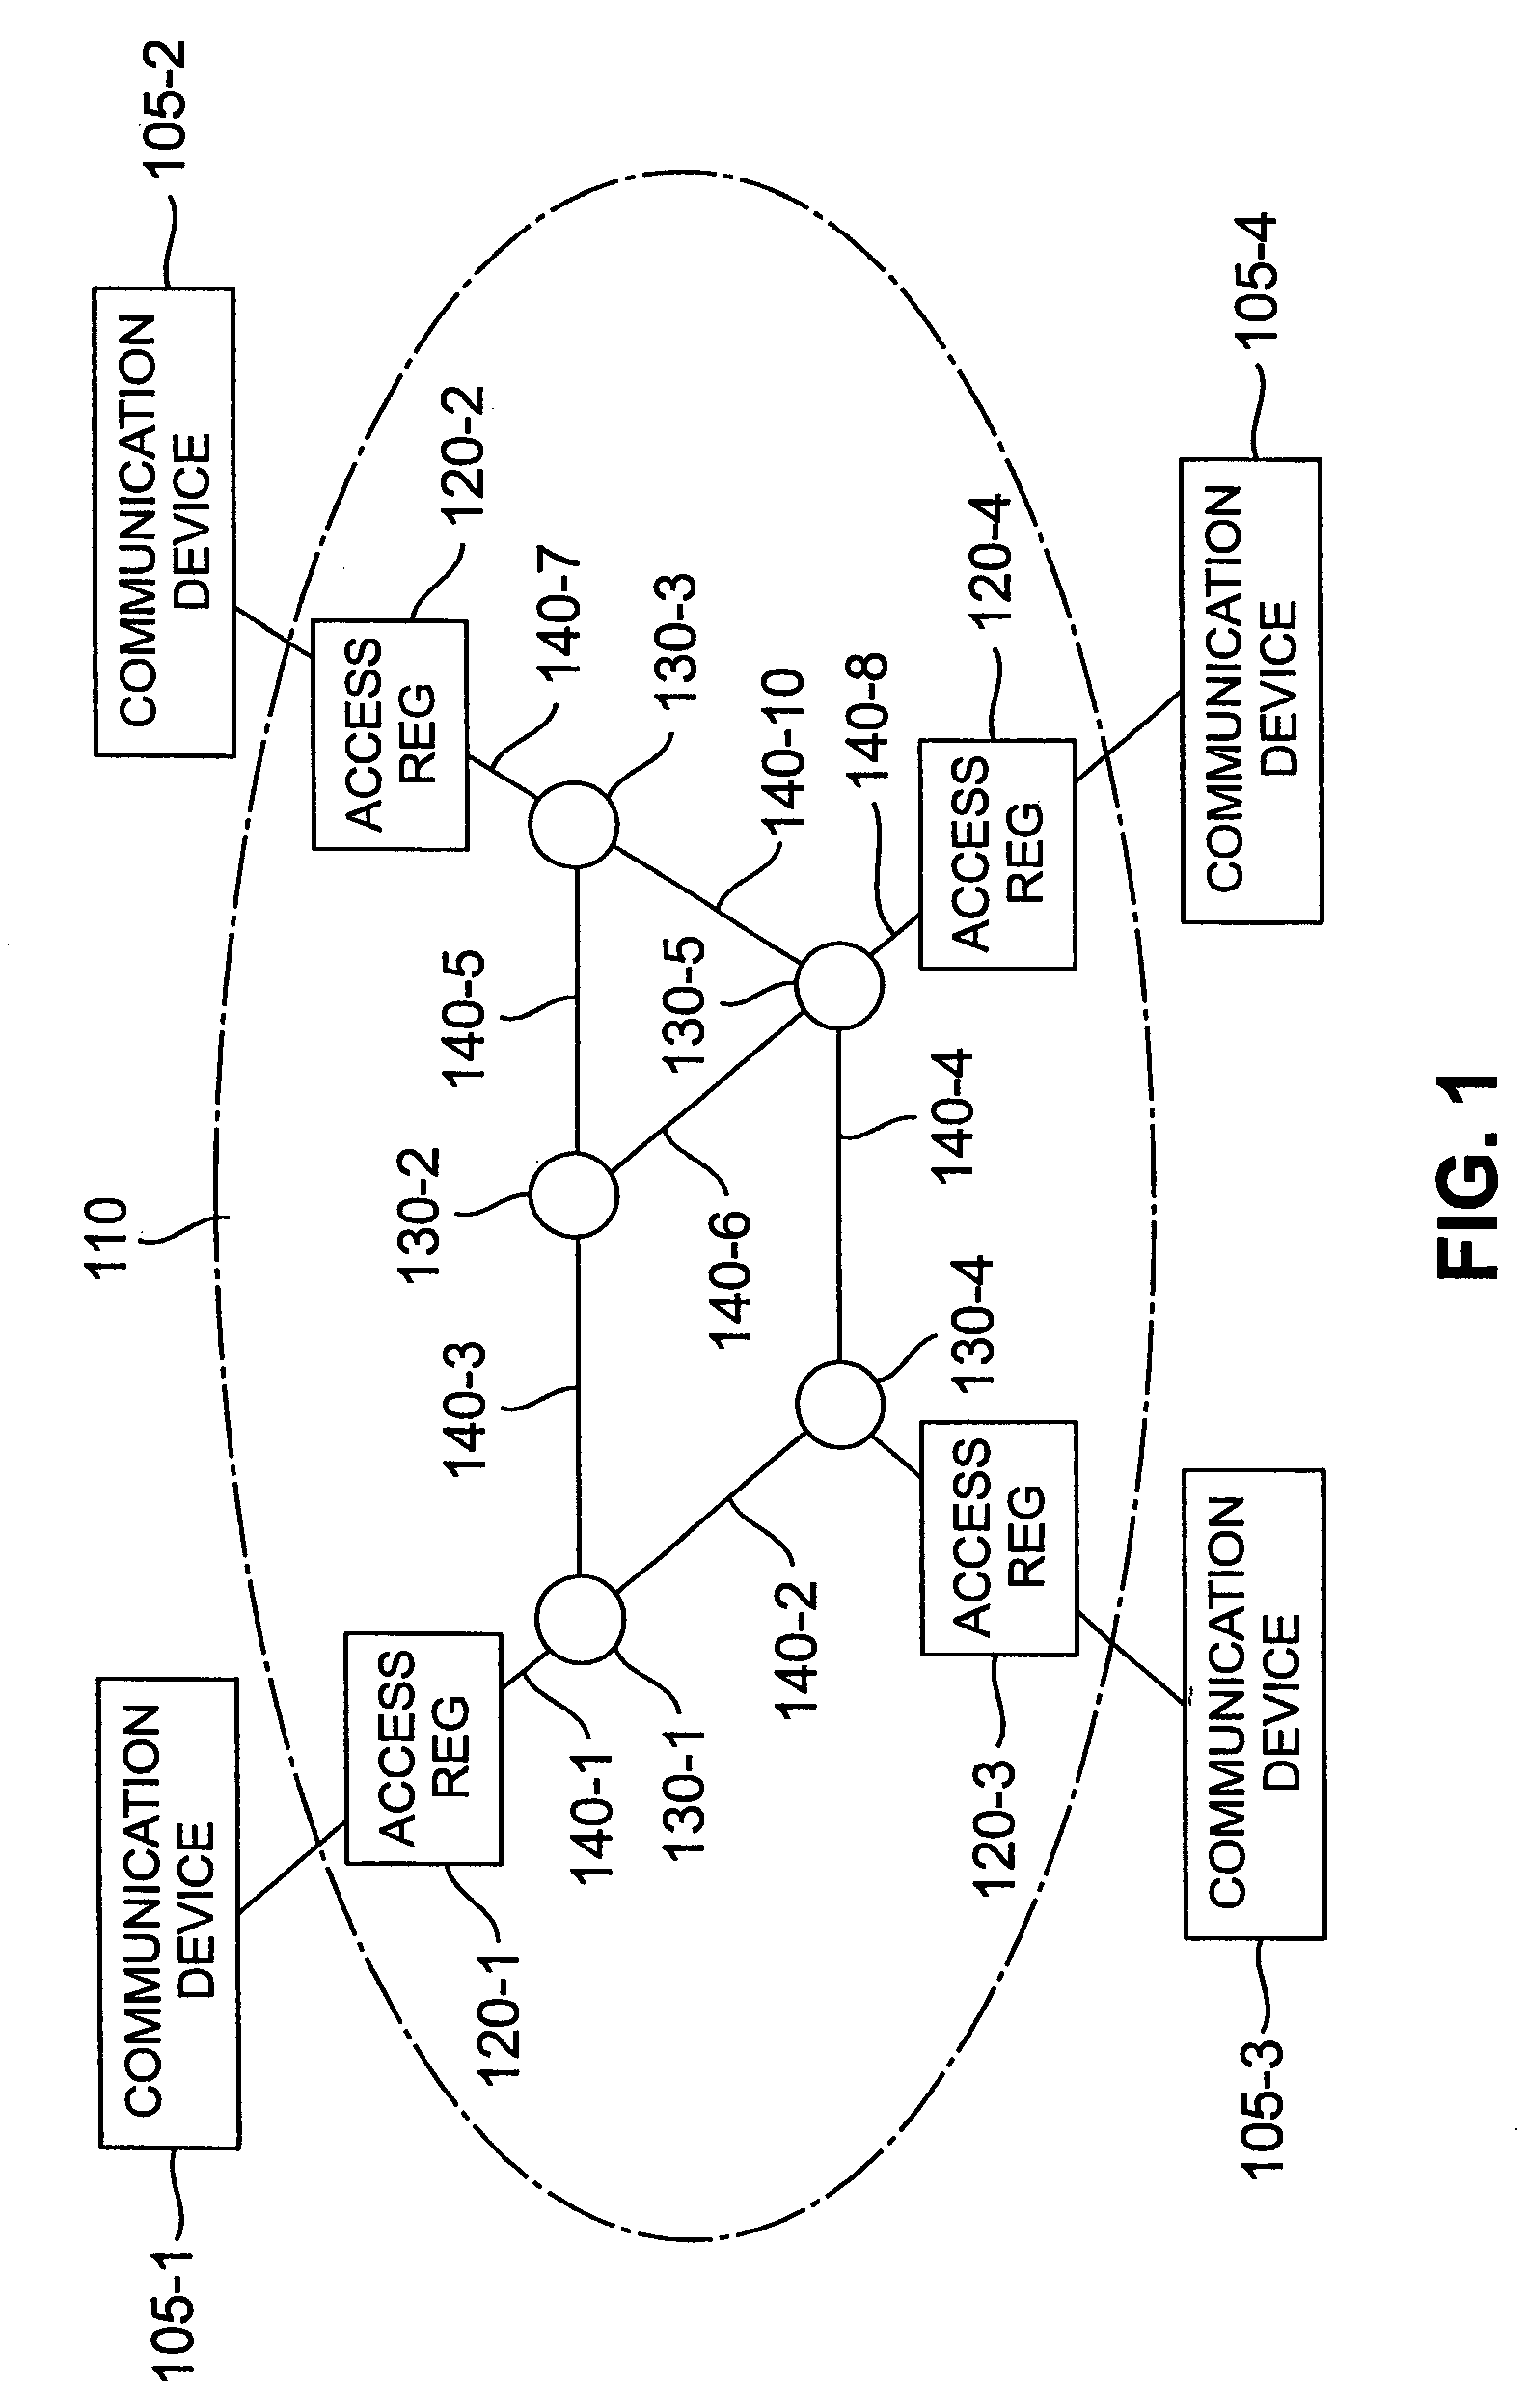 Connection admission control and routing by allocating resources in network nodes